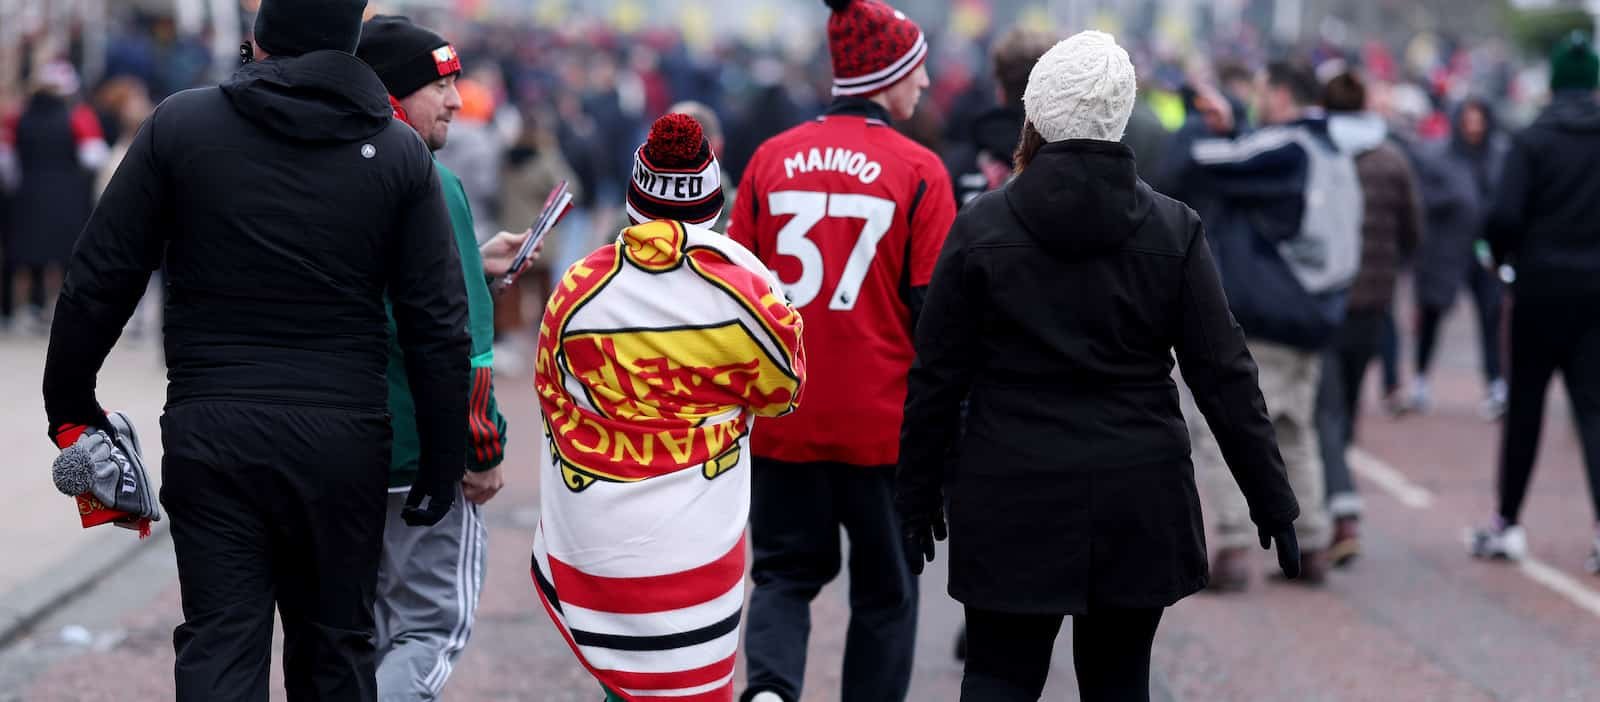 Manchester United fans left in turmoil following nightmare fixture changes – Man United News And Transfer News